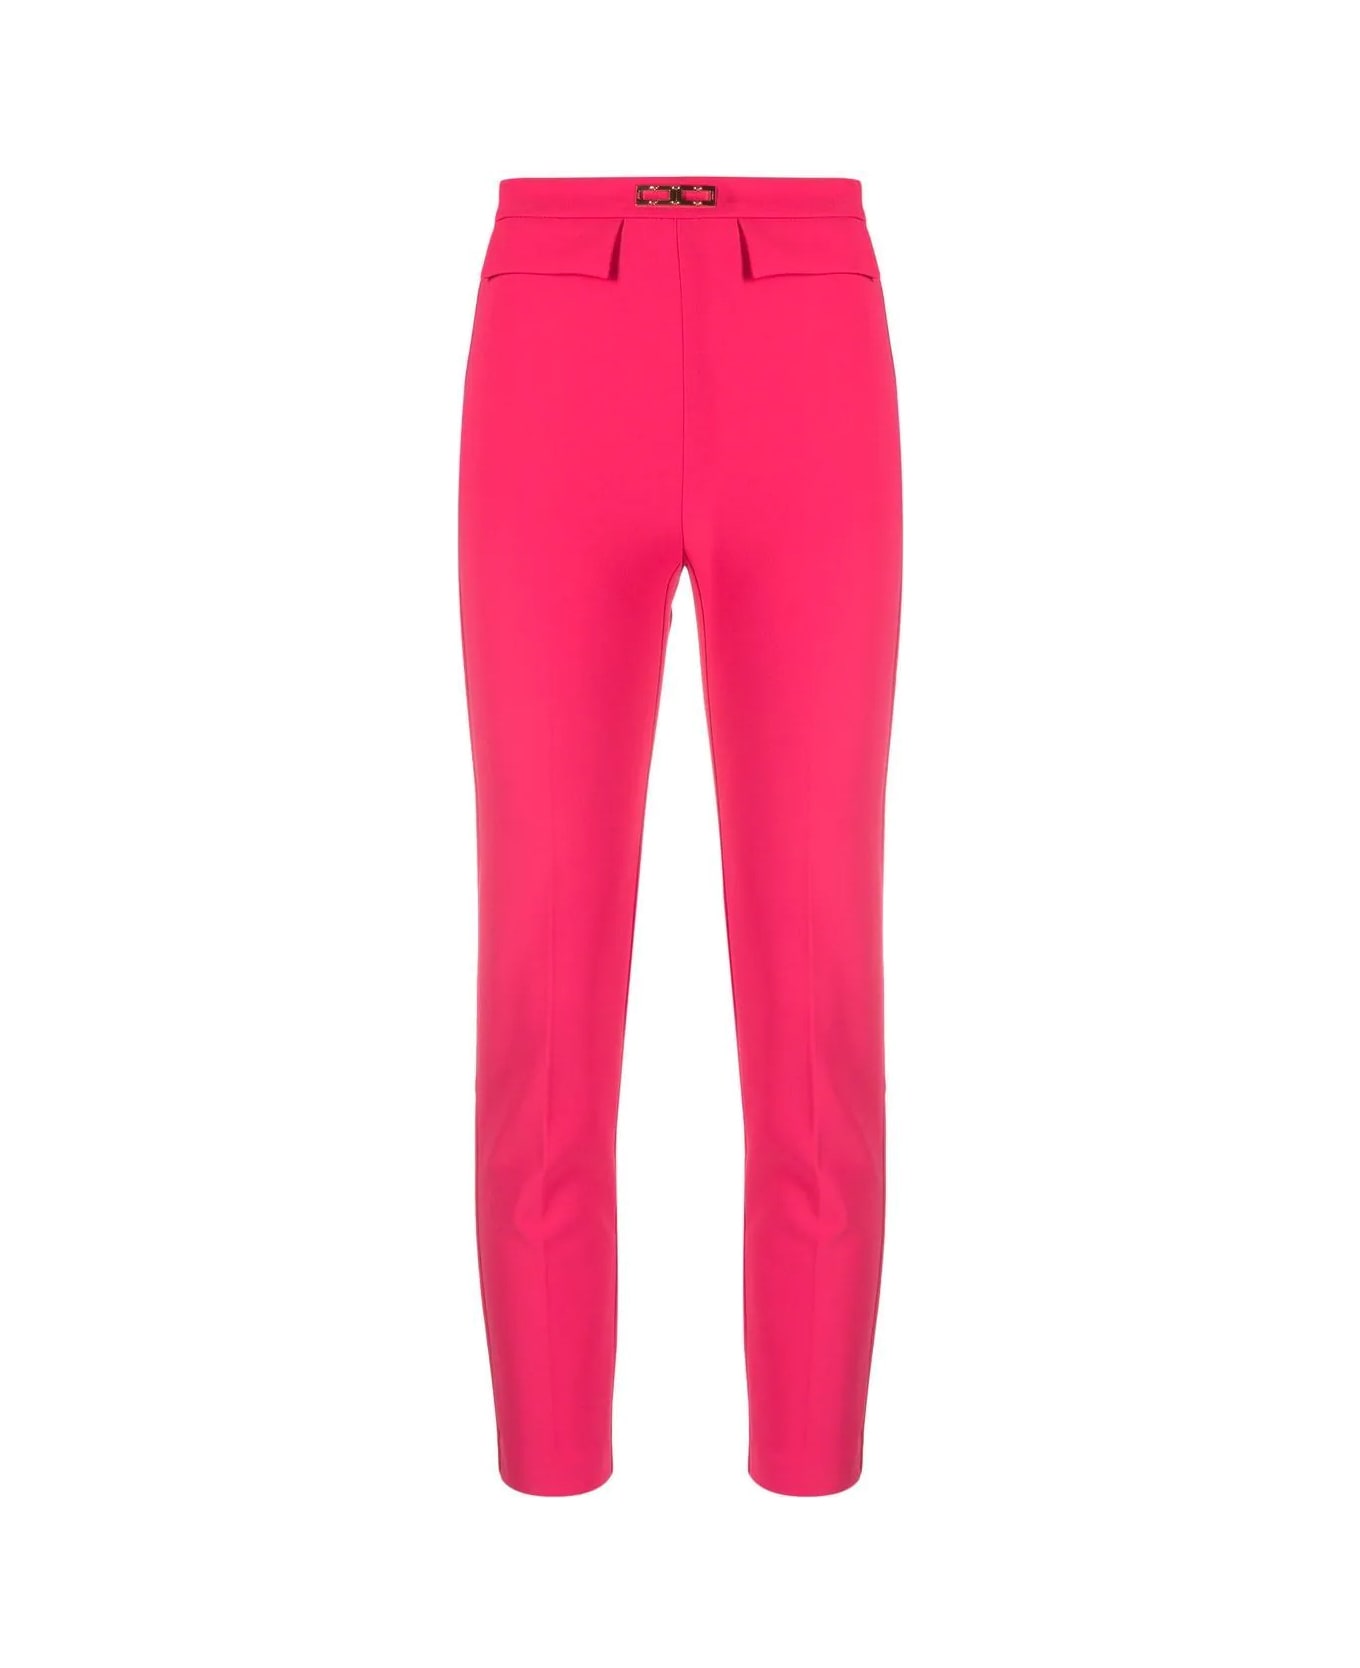 Elisabetta Franchi Cigarette Trousers With Front Pockets - Fuxia